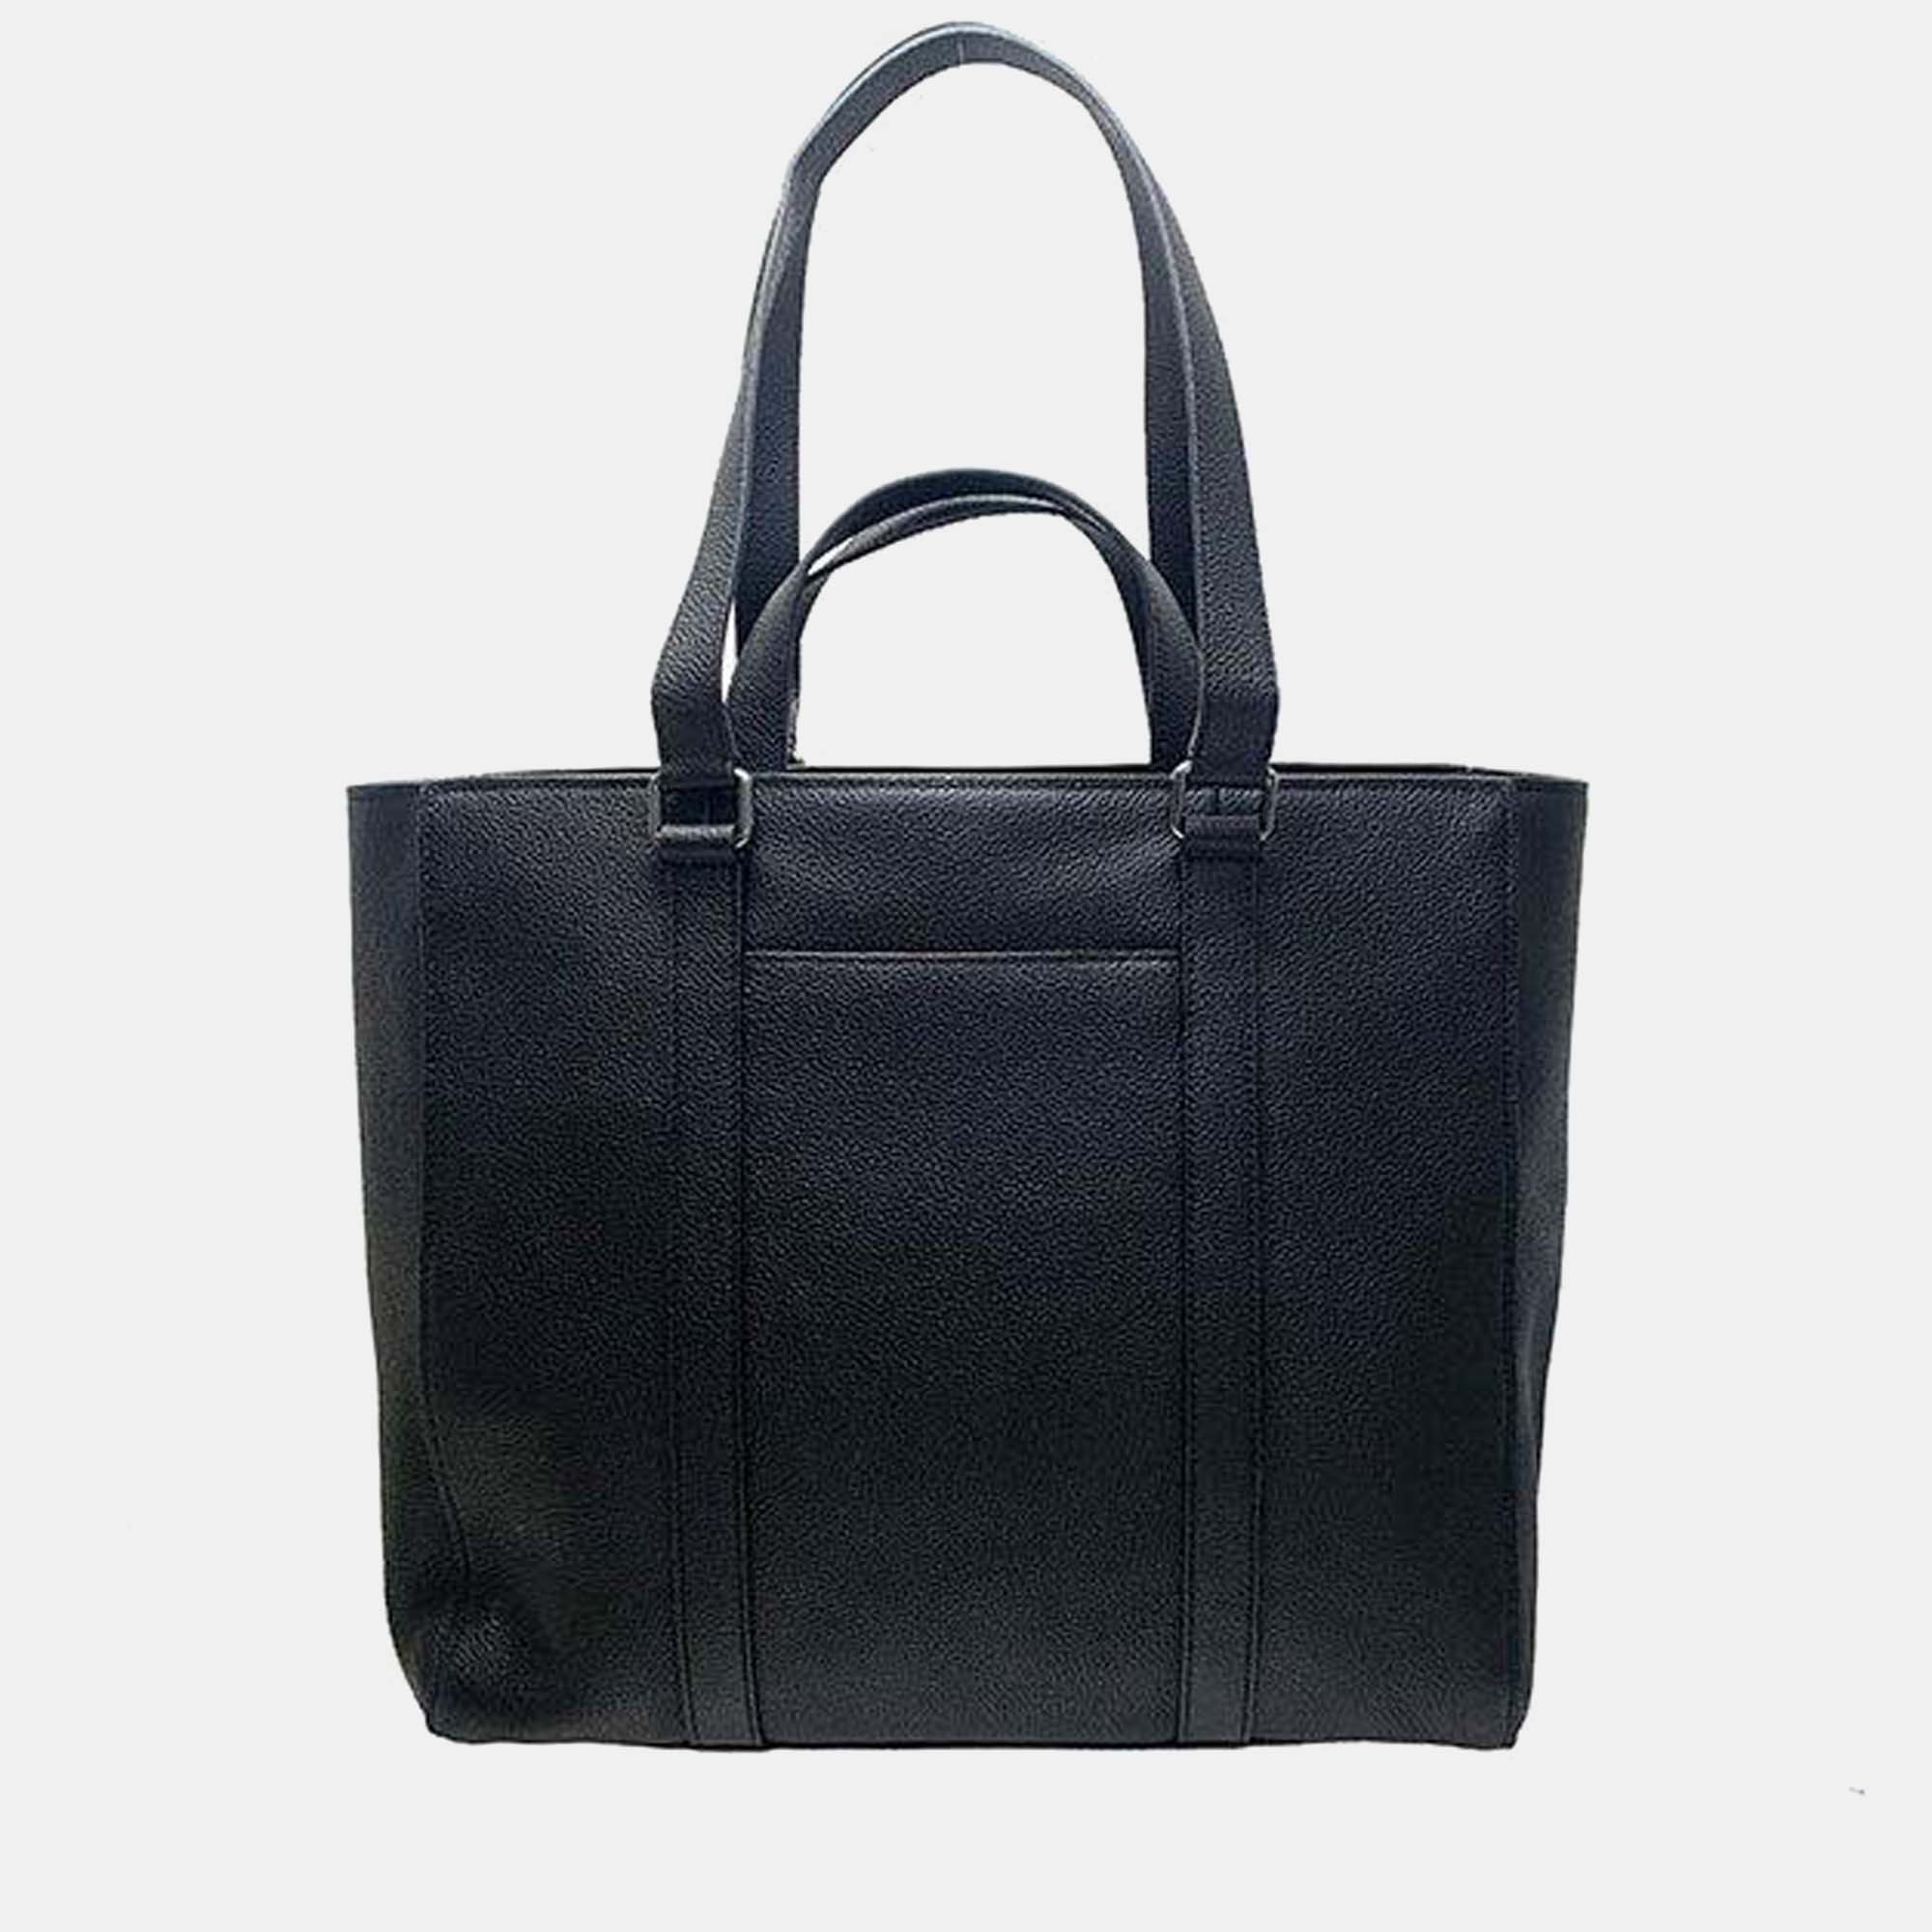 Coach Black - Leather - Double Handle Tote Bag